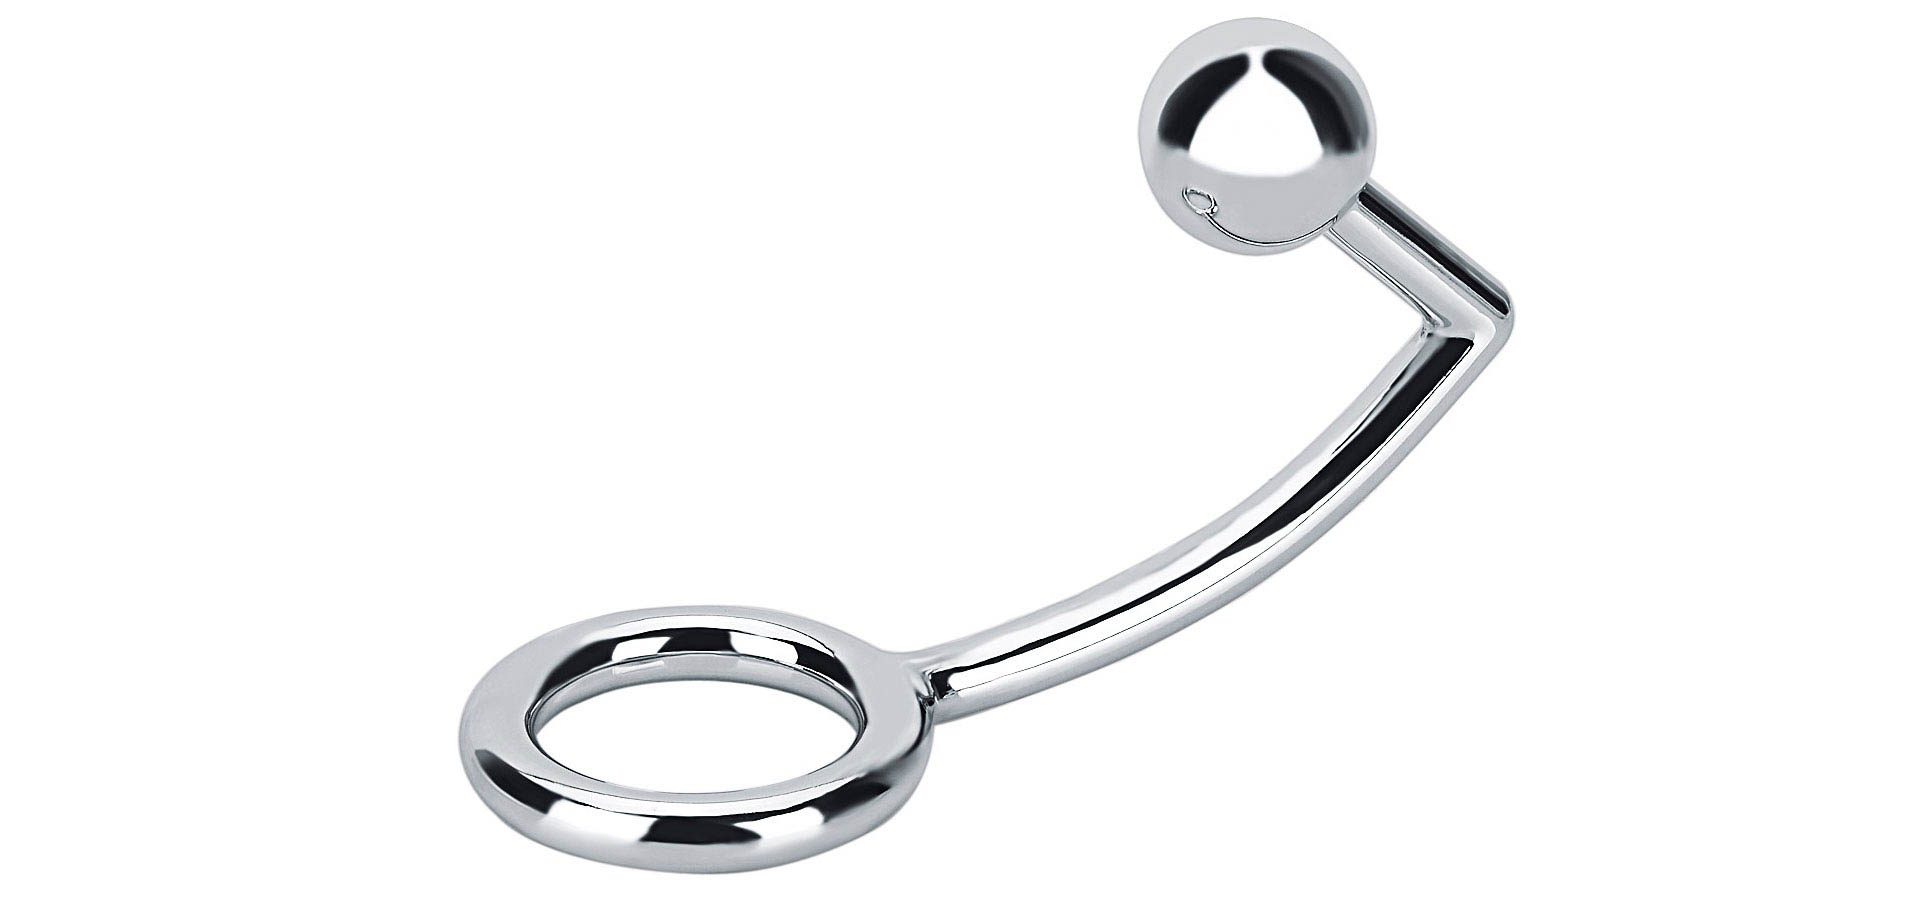 Anal Hook with Cock ring.